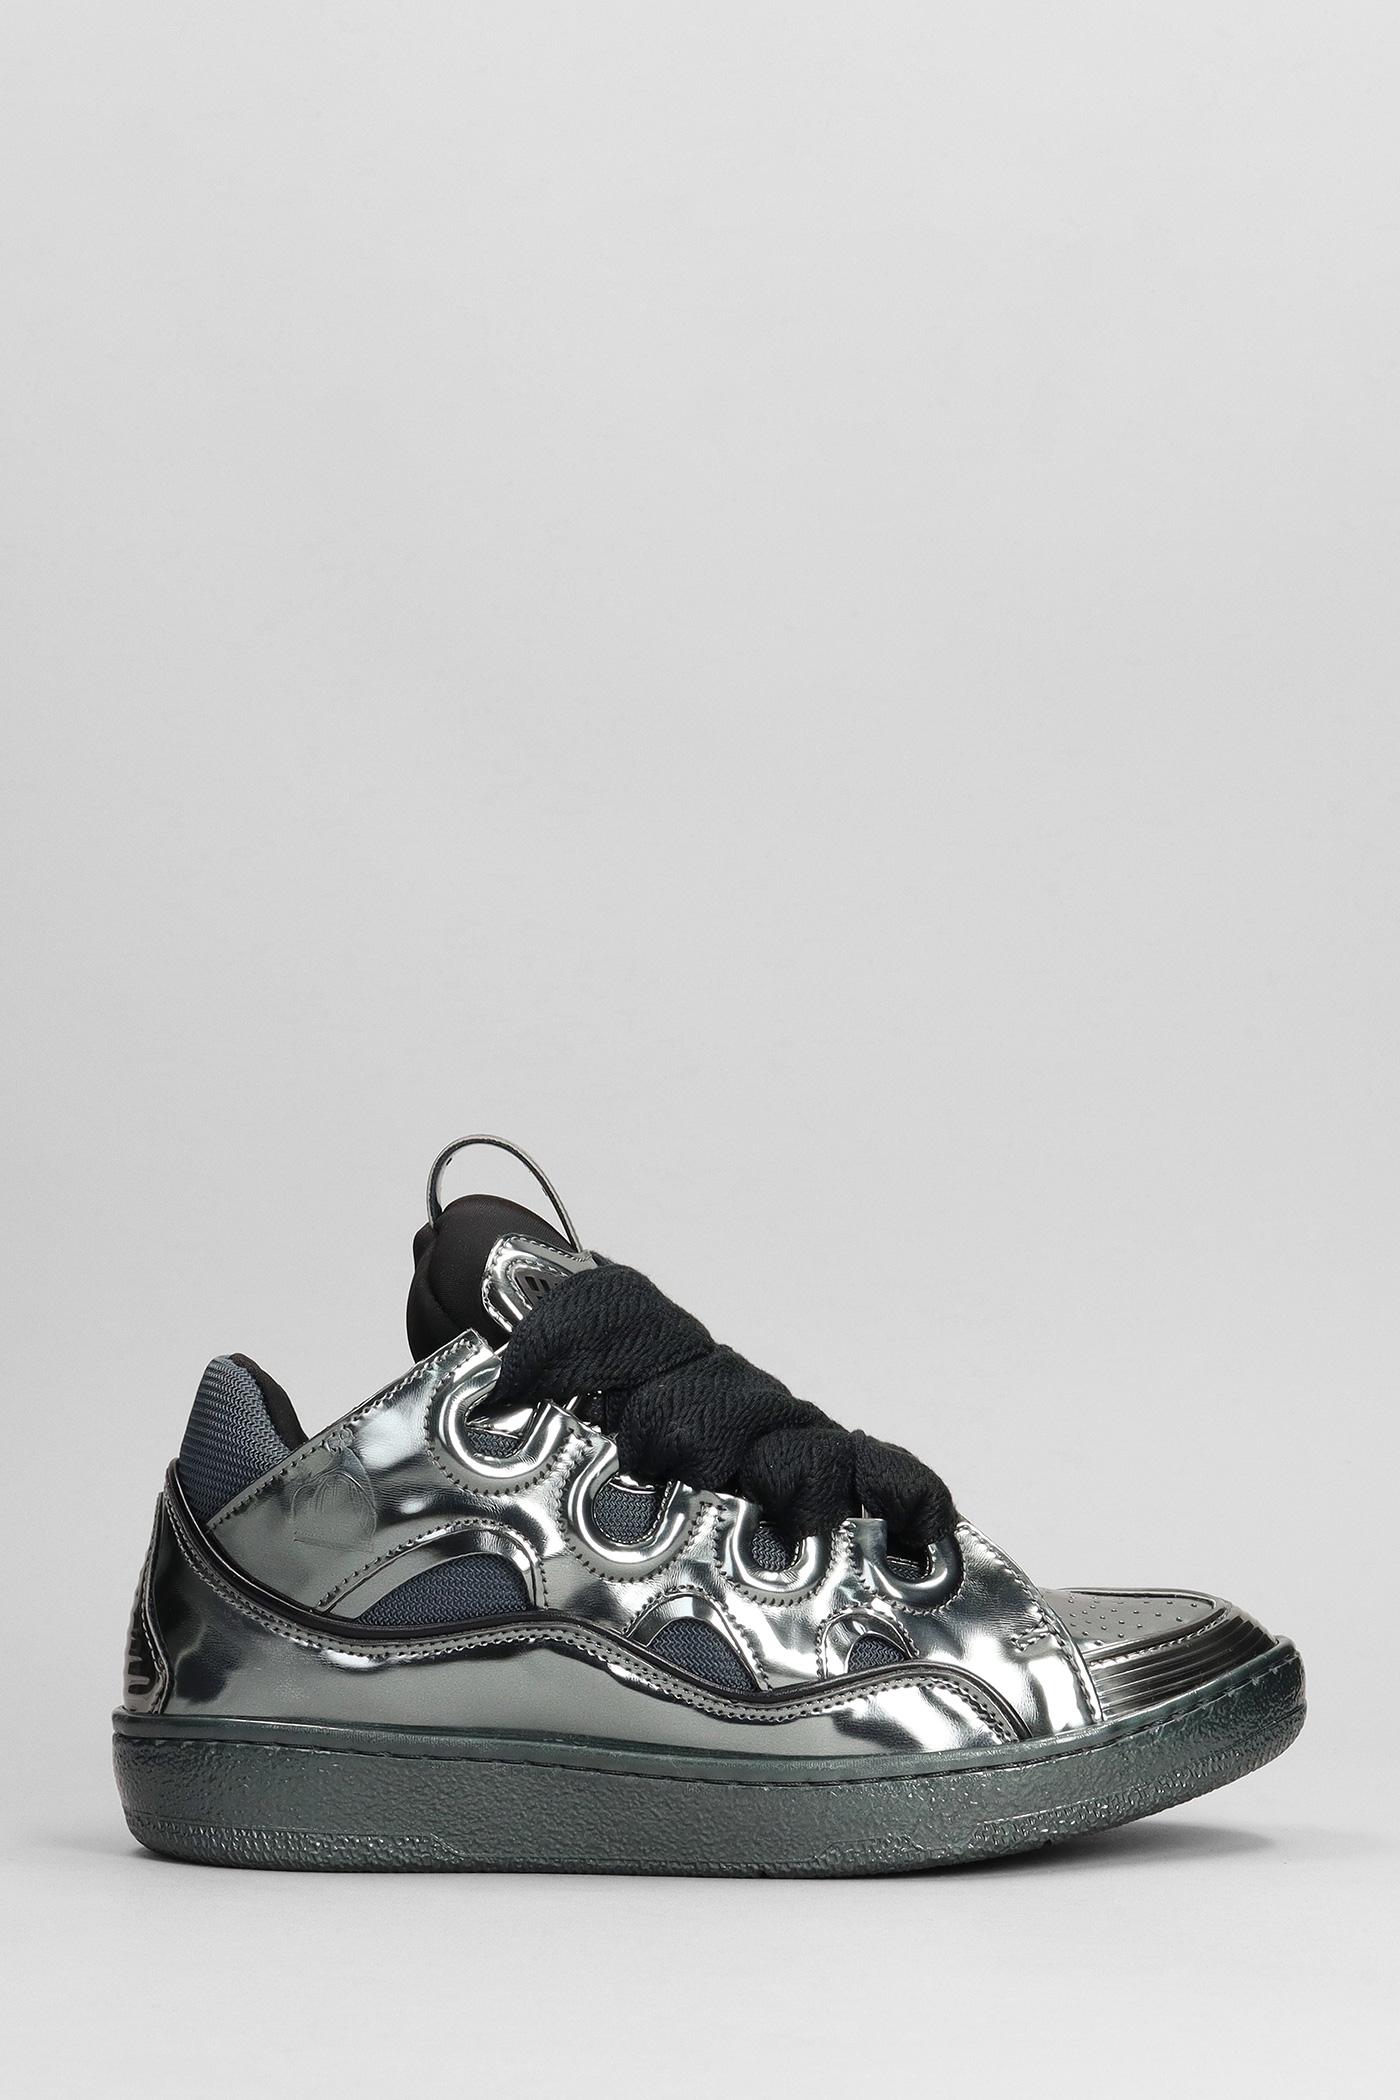 Lanvin Curb Sneakers In Silver Leather in Black | Lyst